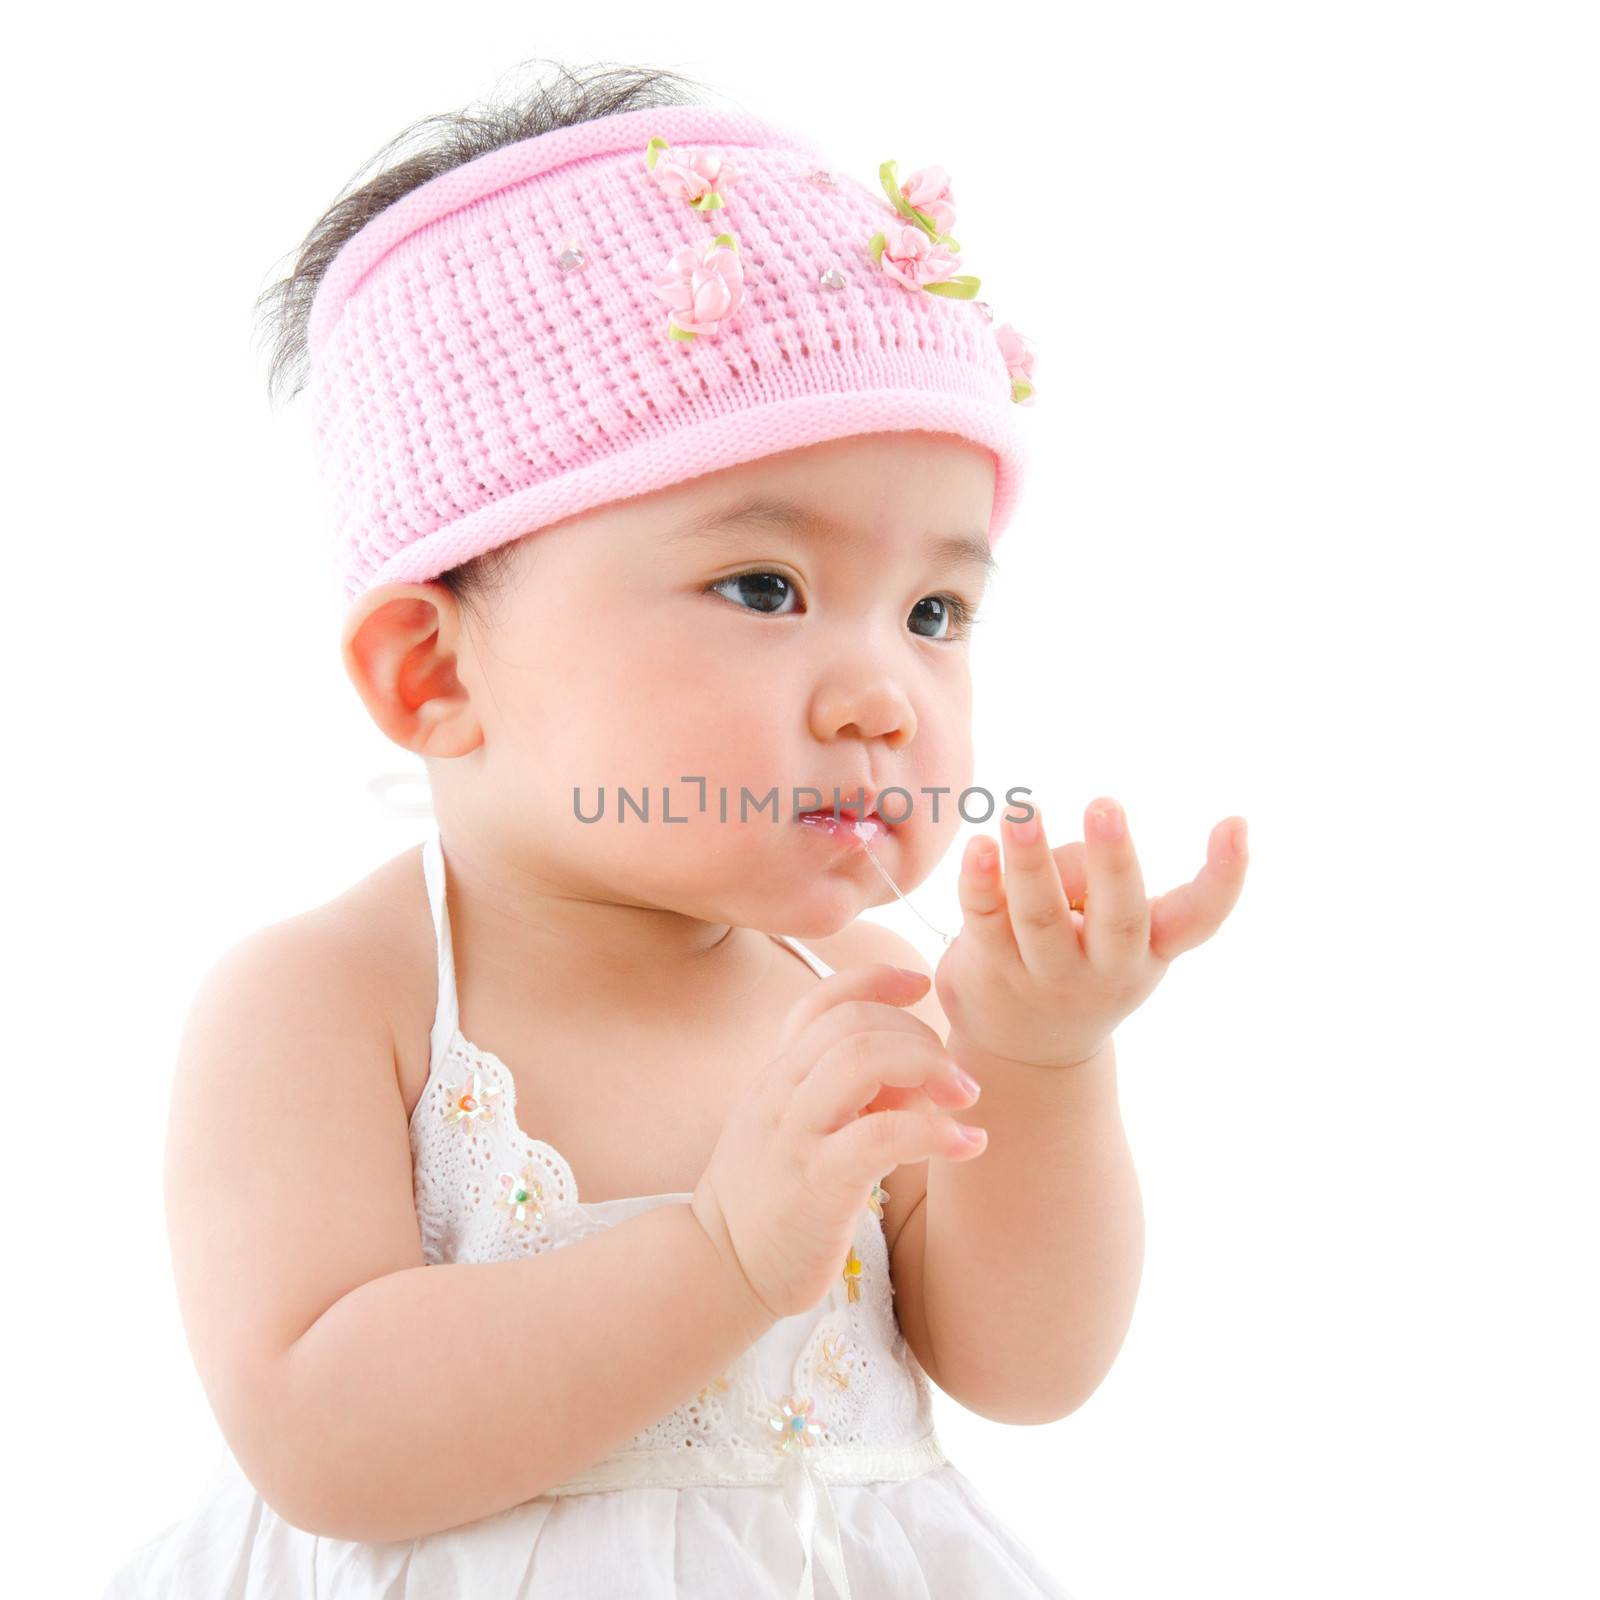 Asian baby girl eating by szefei